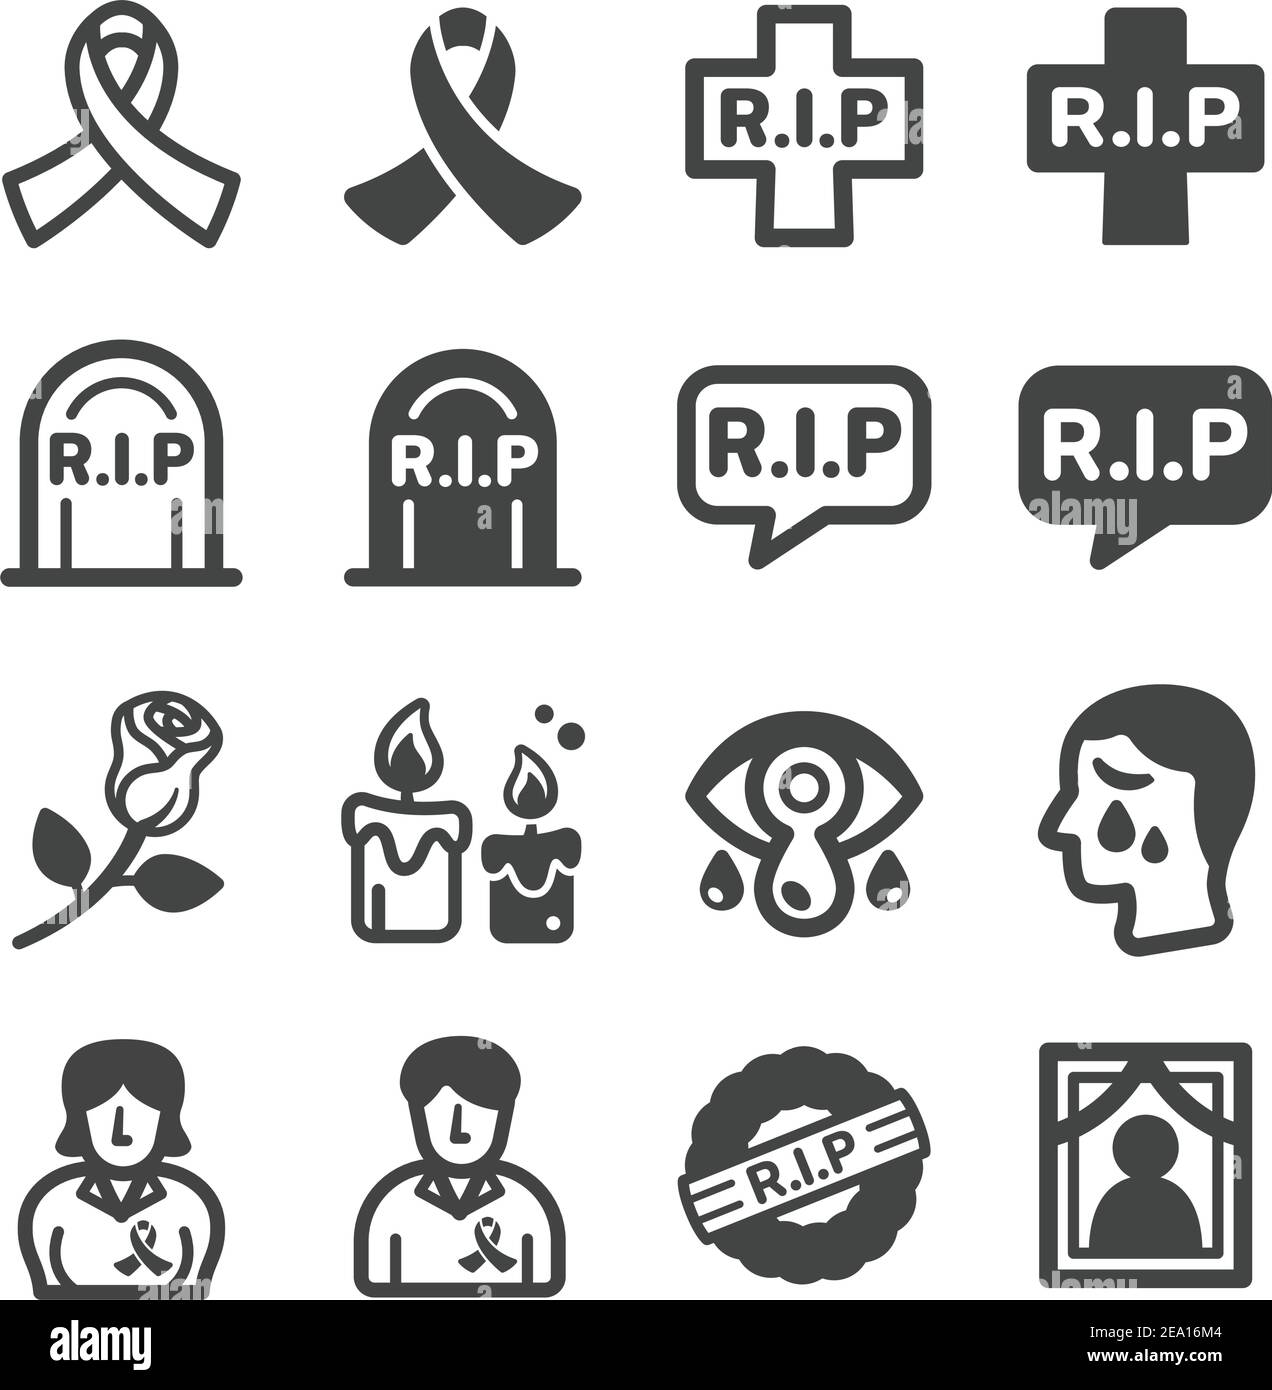 rip,commemorate,remembrance icon set,vector and illustration Stock Vector